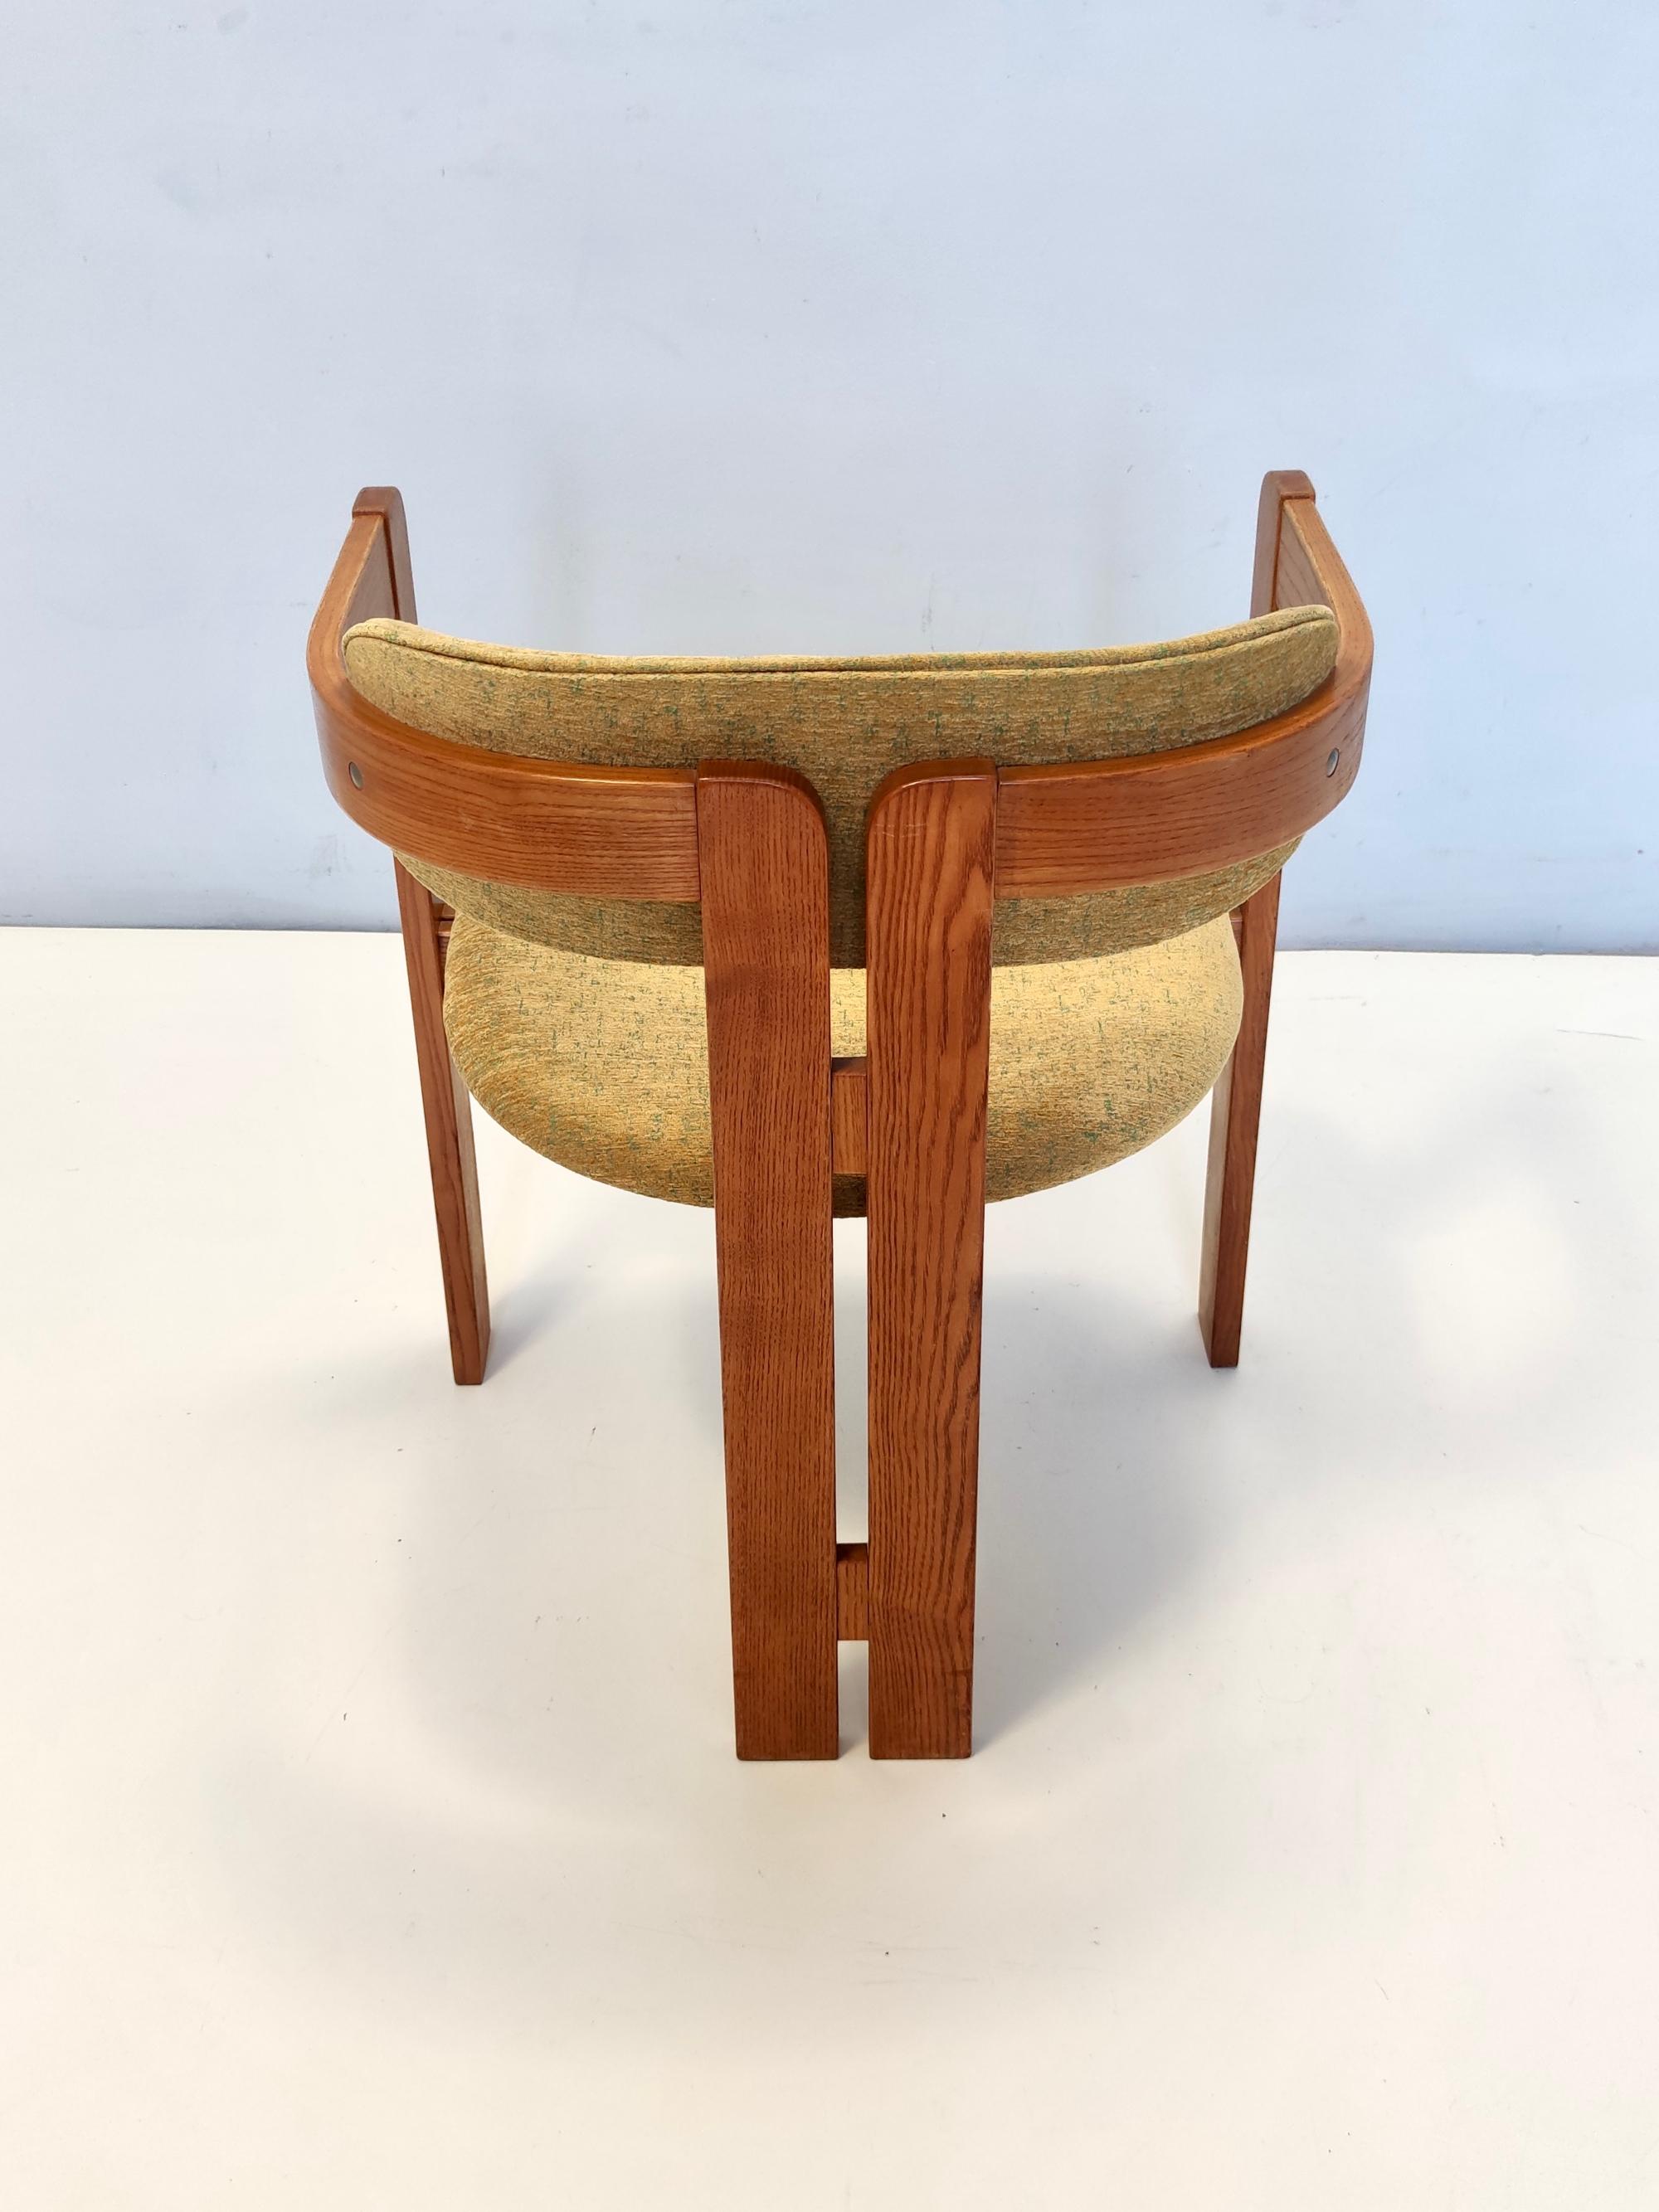 Velvet Pigreco Chair in the style of Tobia Scarpa for Gavina with Yellow Upholstery